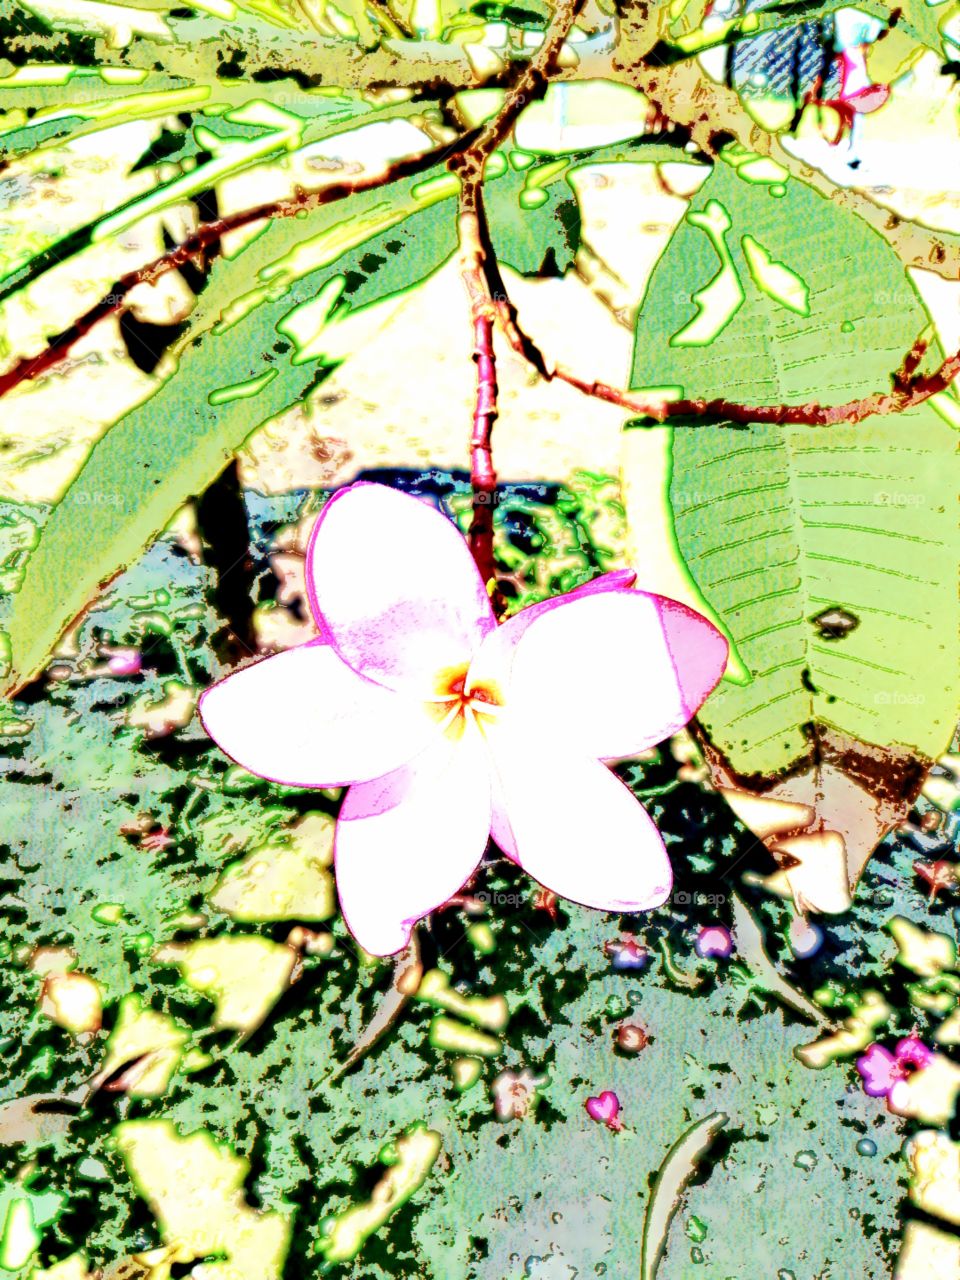 Crayon drawing of a pale pink Frangipani flower on tree